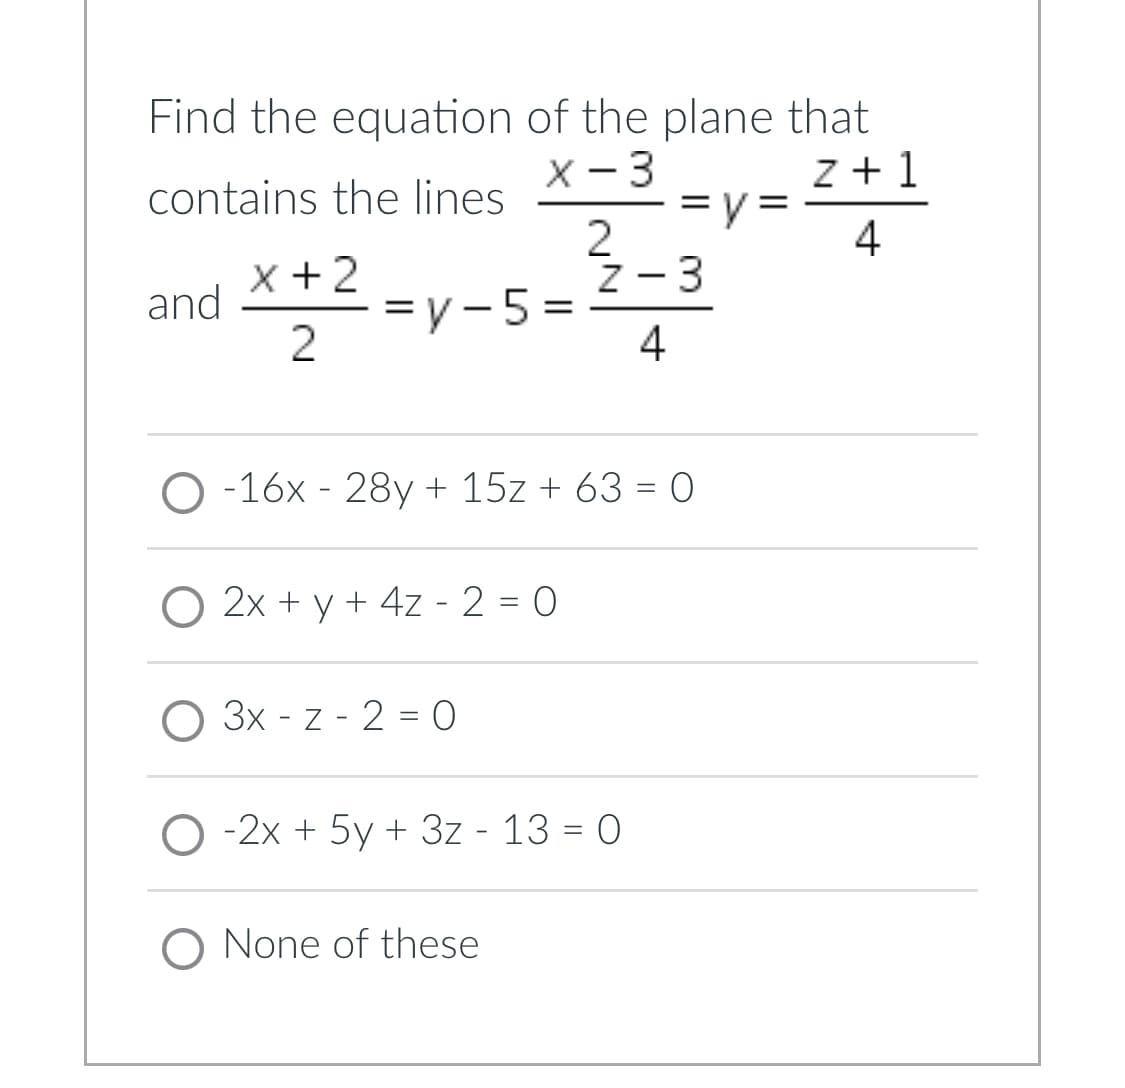 Find the equation of the plane that
x - 3
contains the lines
y=2+1
2
Z-3
x + 2
and x22.
=y-5=
4
O-16x 28y + 15z + 63 = 0
2x + y + 4z - 2 = 0
3x - z - 2 = 0
O-2x + 5y + 3z - 13 = 0
O None of these
= y